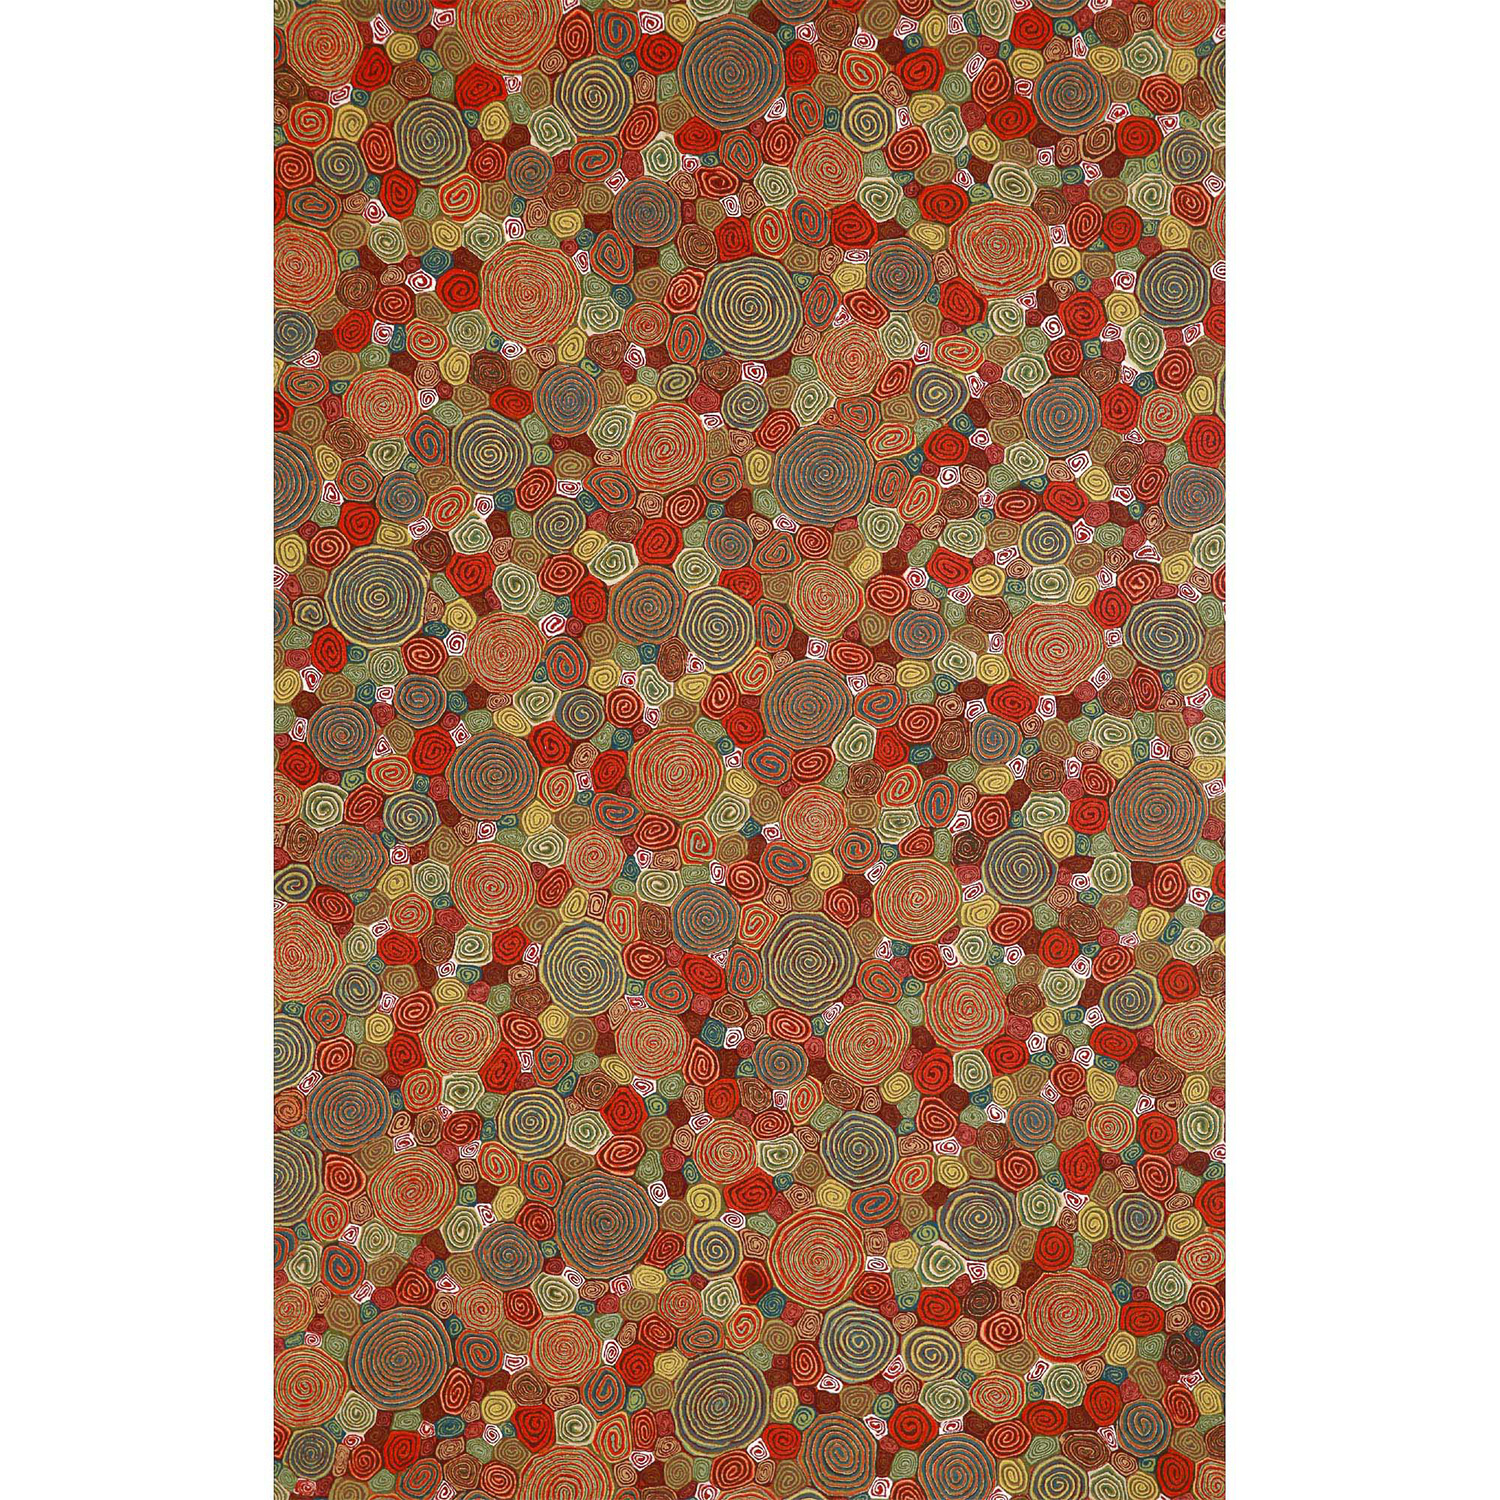 Liora Manne Visions III  Rug-Abstract, Giant Swirls Fiesta  Product Image